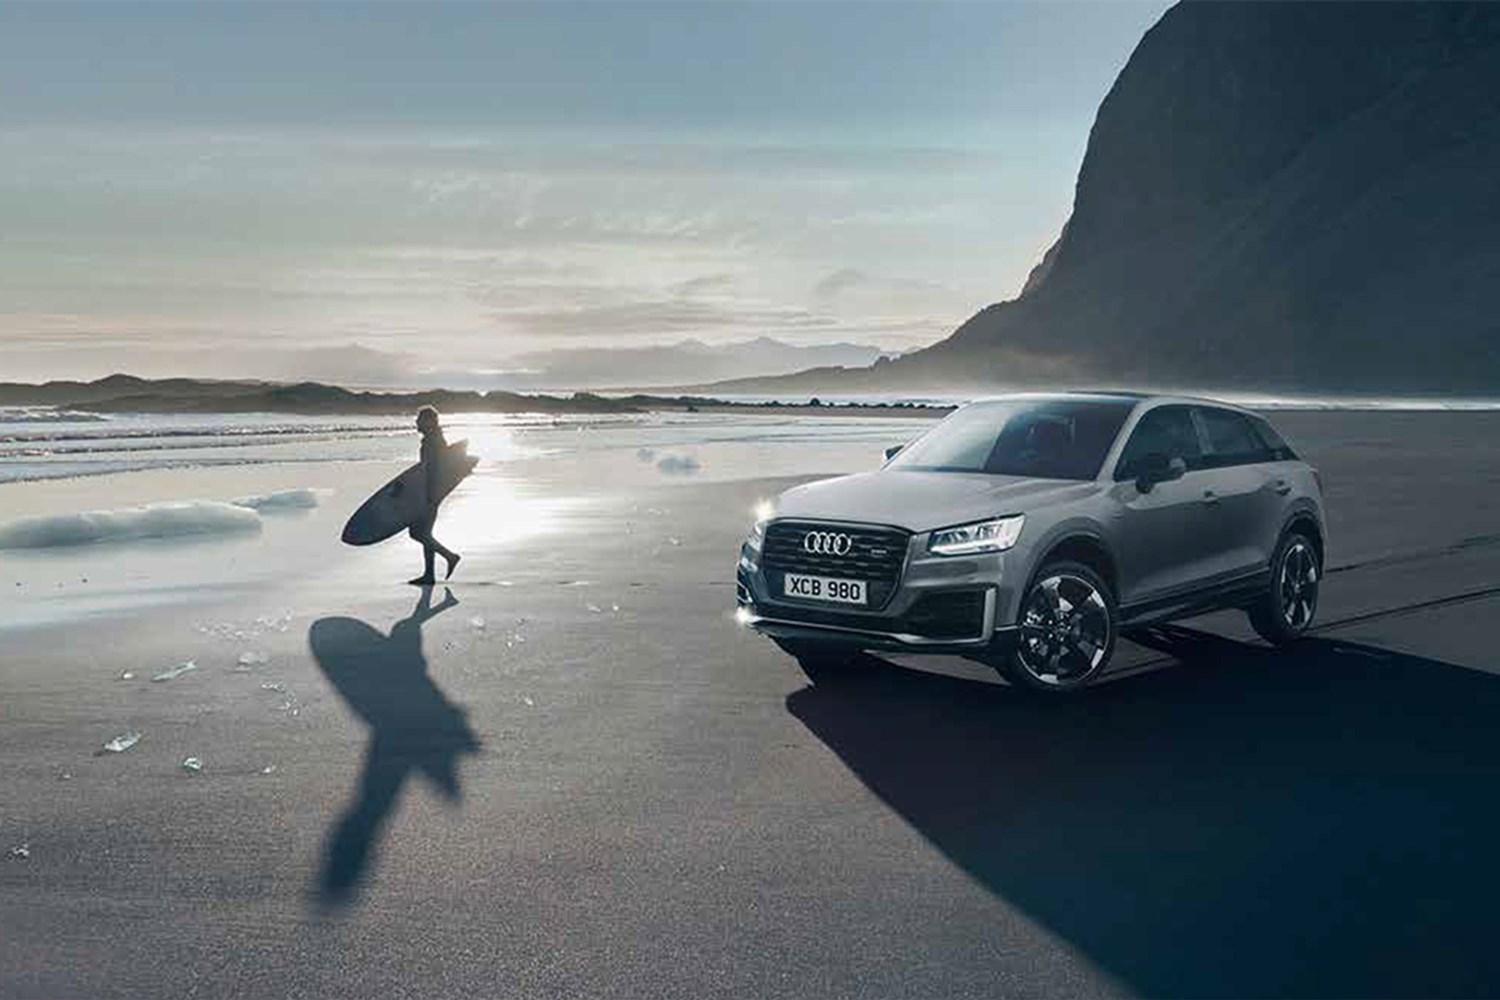 Audi Q5 is parked on a sandy beach with person walking towards sea holding a surf board